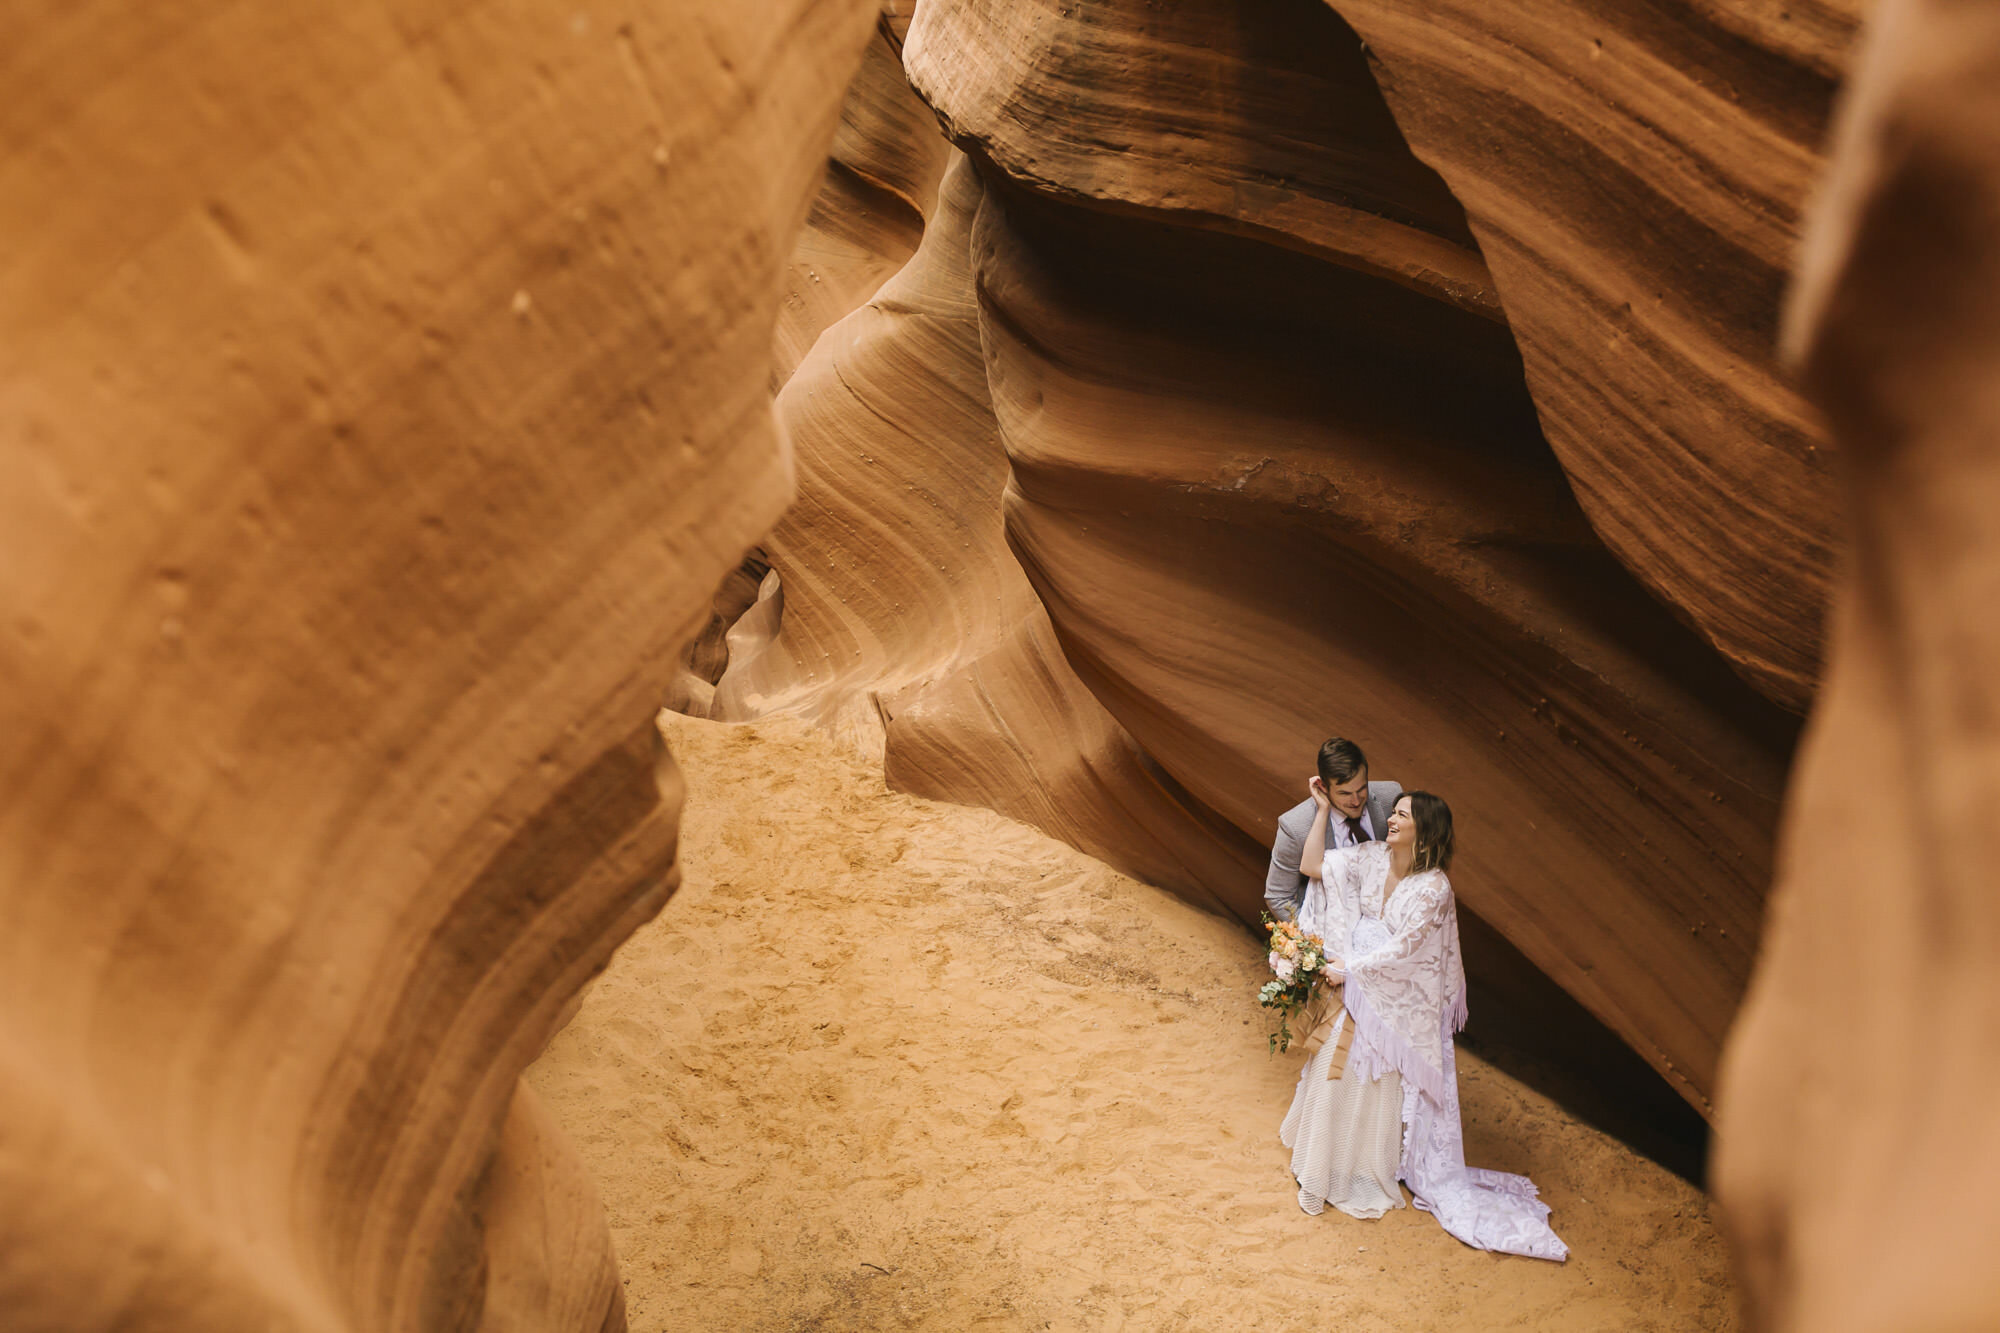 Looking down on a snuggly wedding couple in a slot canyon in the desert in Arizona